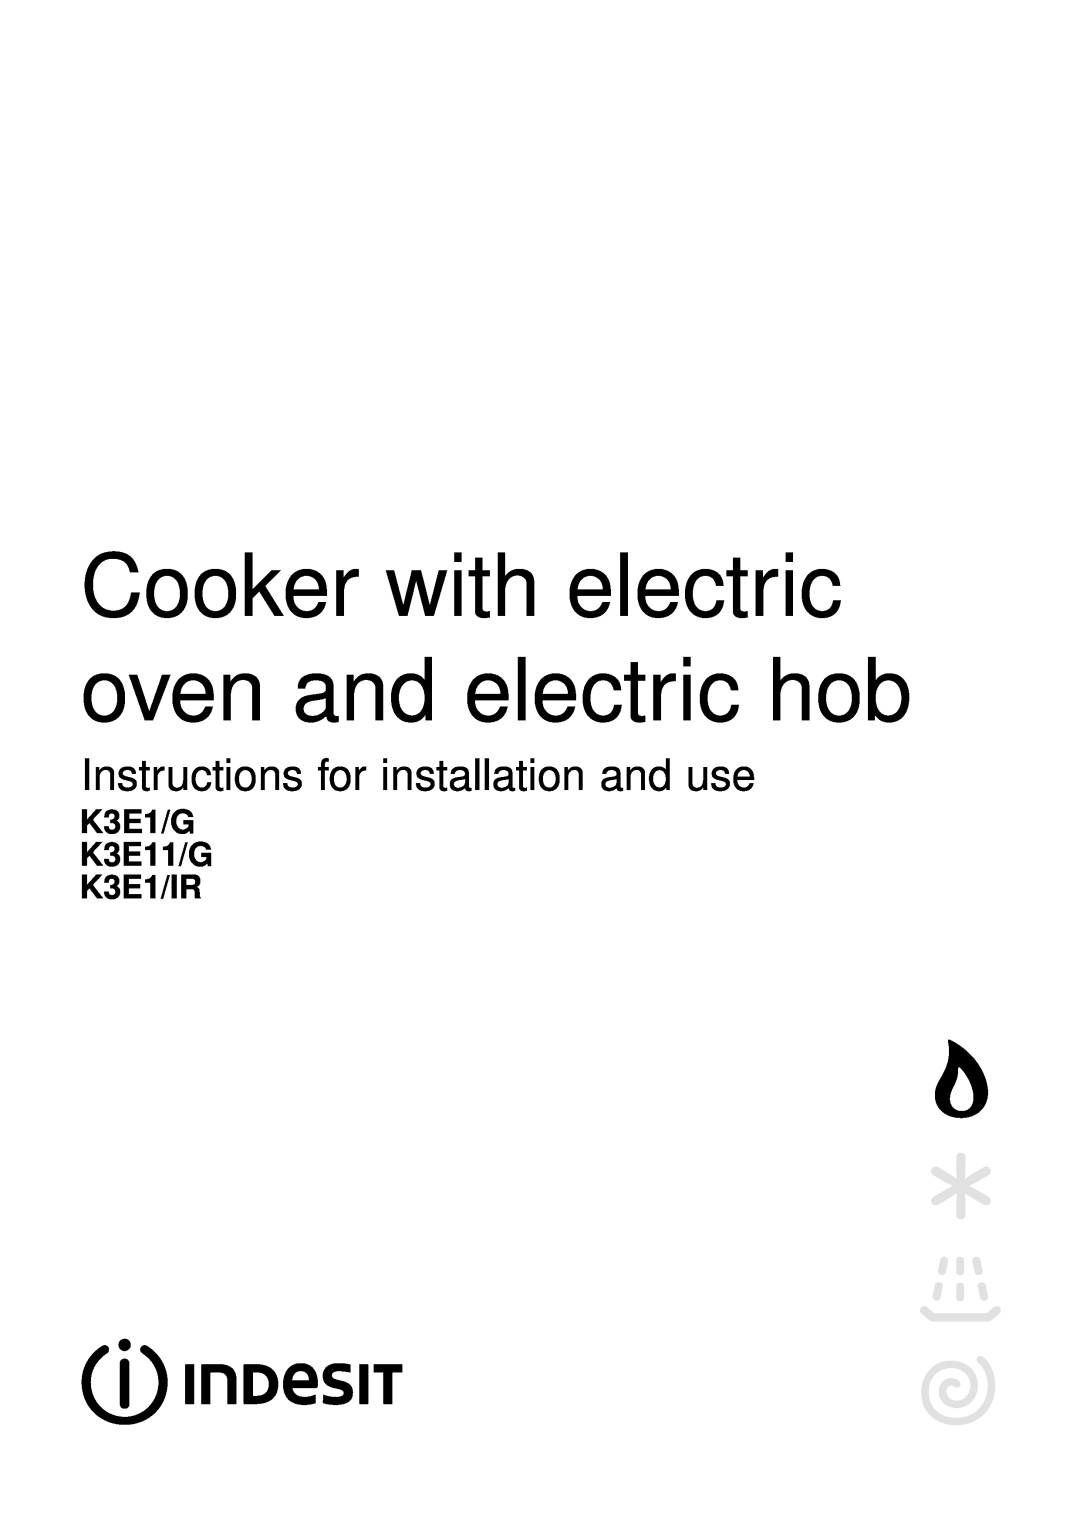 Indesit K3E1/G, K3E1/IR, K3E11/G manual Cooker with electric oven and electric hob, Instructions for installation and use 